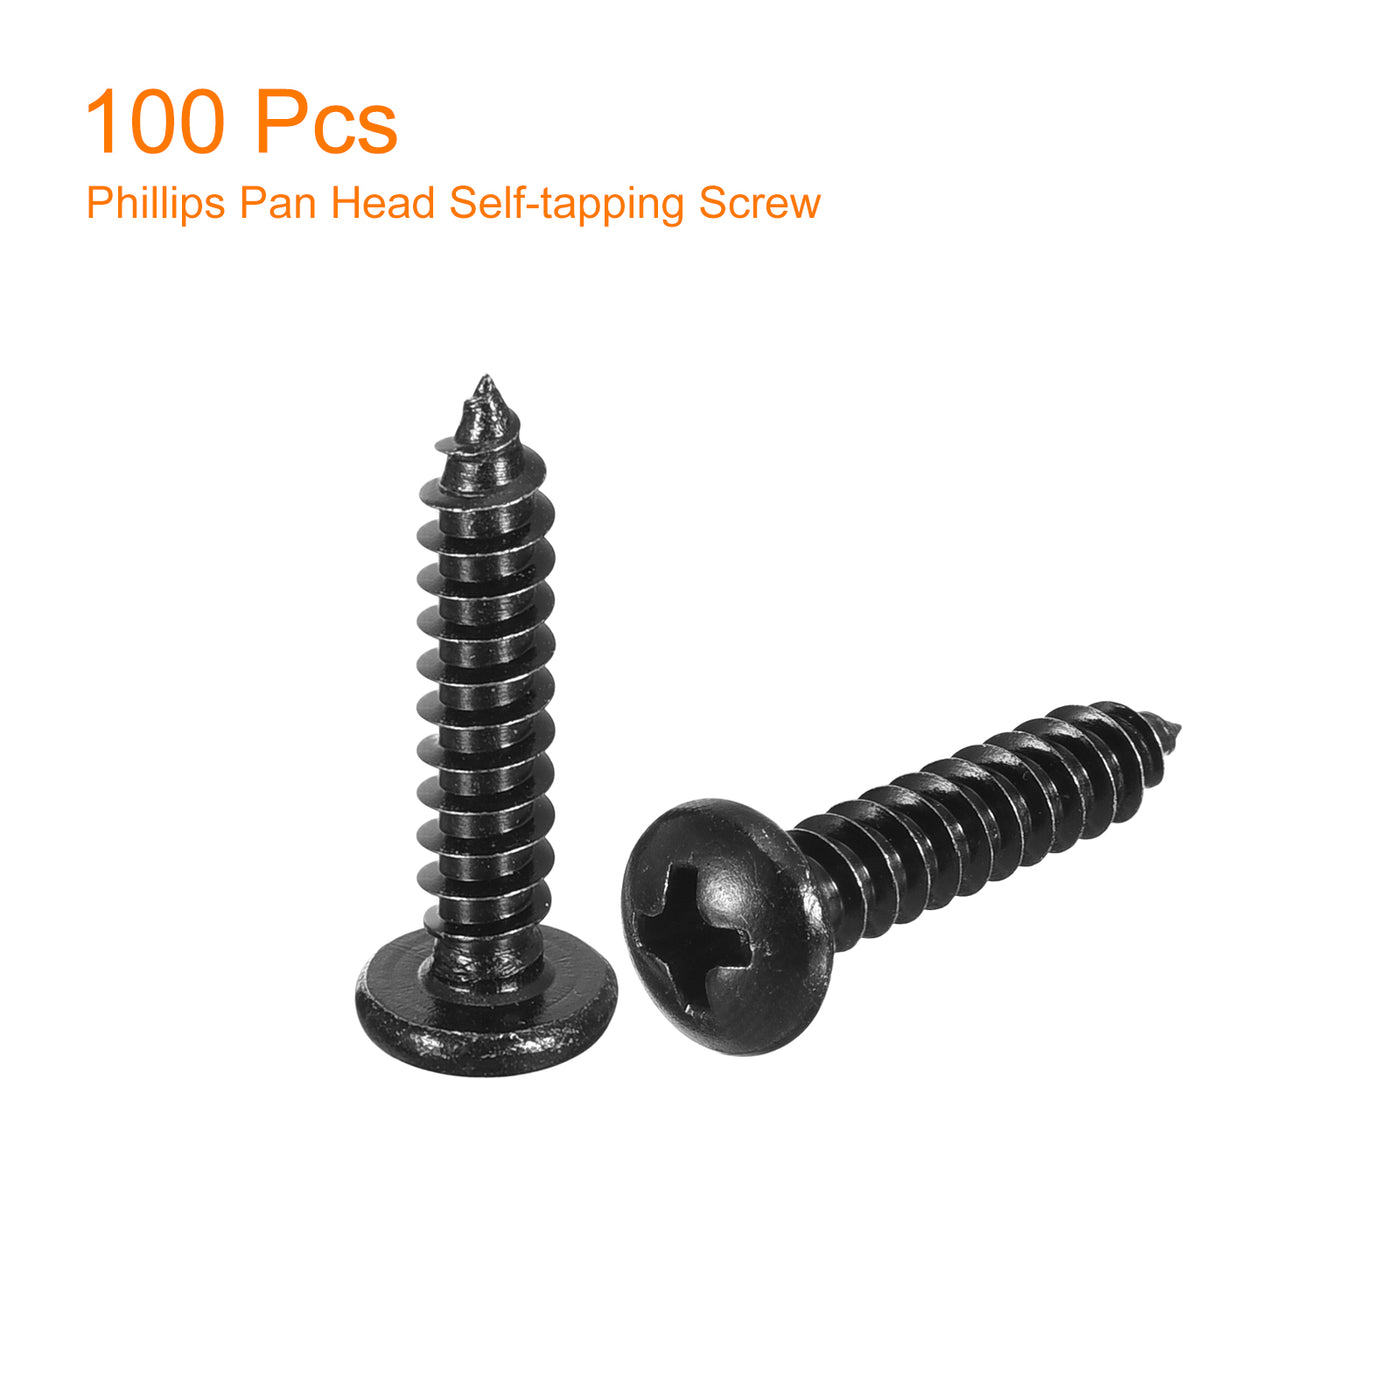 uxcell Uxcell 4mm x 20mm Phillips Pan Head Self-tapping Screw, 100pcs - 304 Stainless Steel Round Head Wood Screw Full Thread (Black)